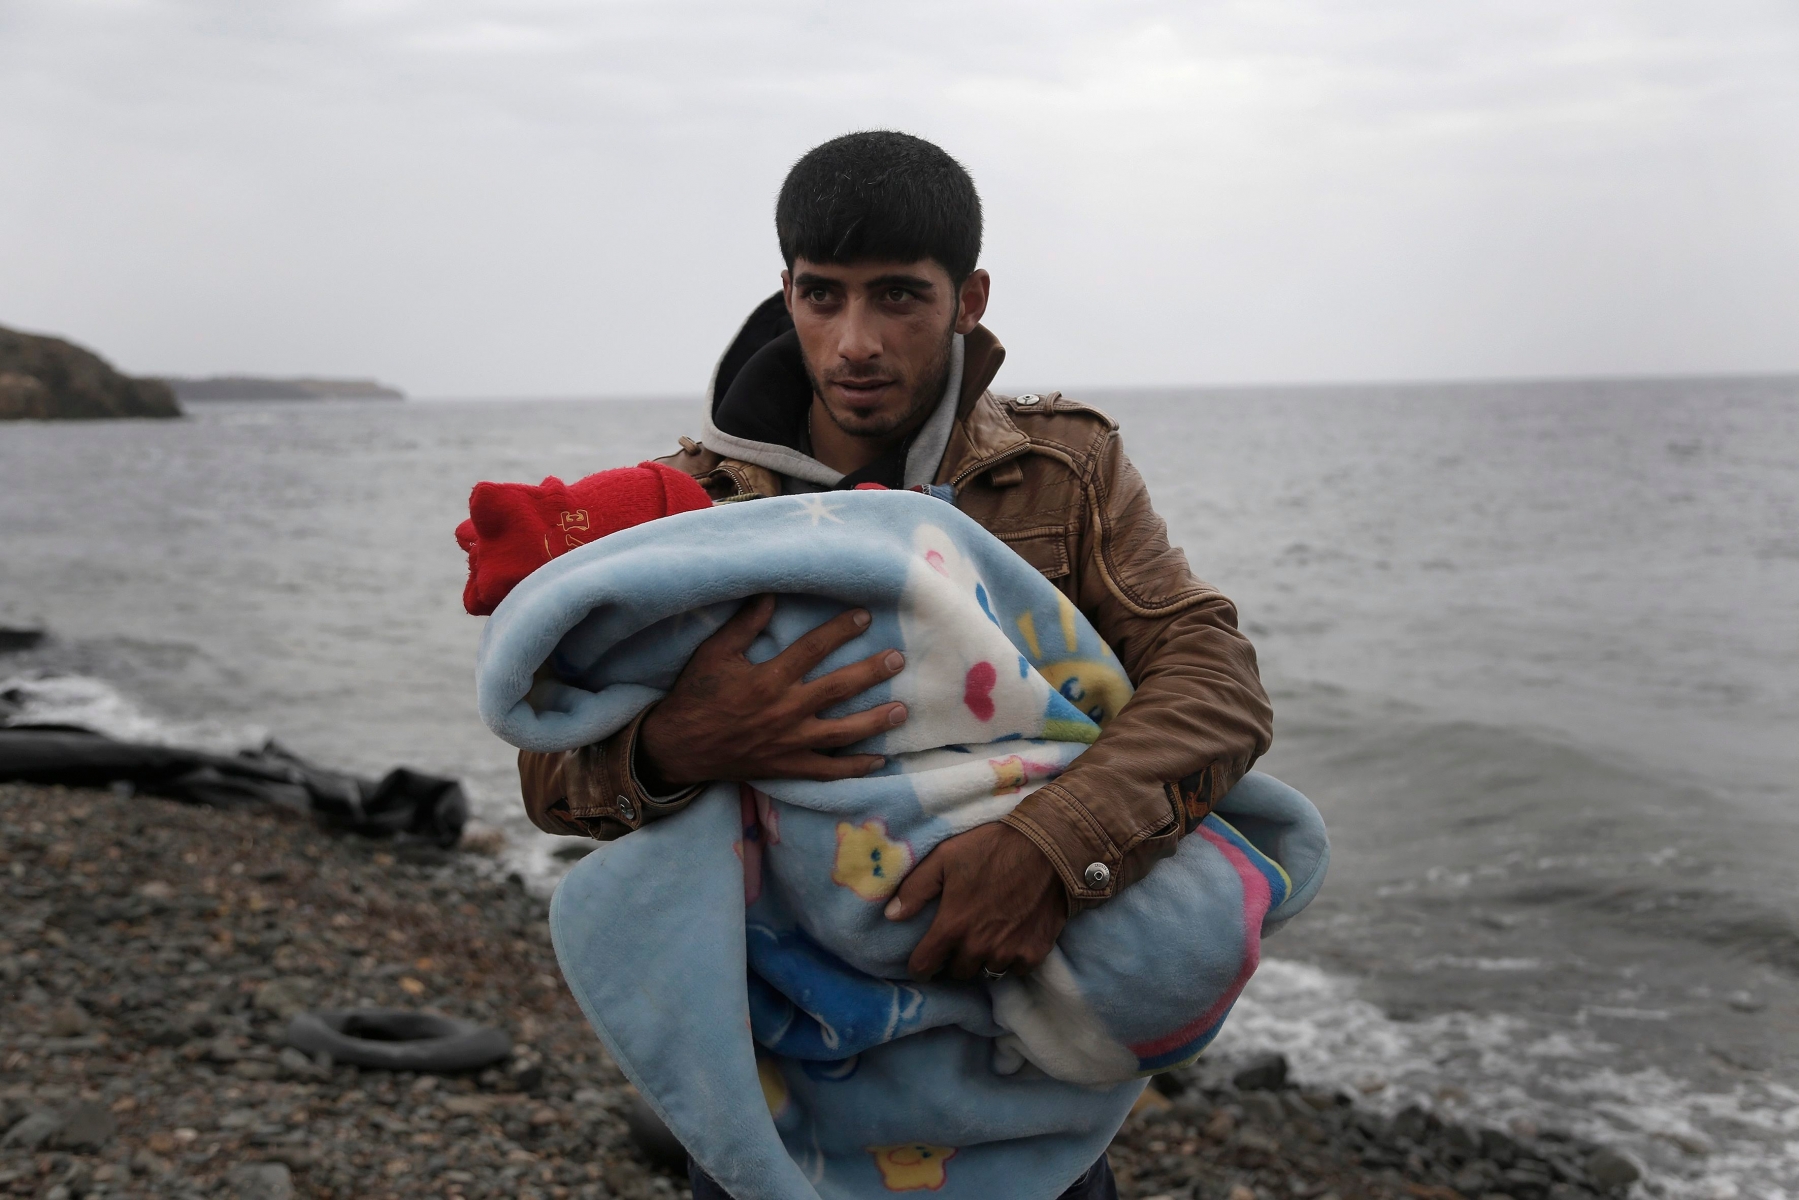 epa04973104 A man holds his baby after arriving on a rubber dinghy on the island of Lesvos, having crossed the Aegean sea from Turkey, Greece, 11 October 2015. A recently agreed European Union plan to relocate tens of thousands of asylum seekers from Italy and Greece elsewhere in the bloc will start at the end of this week, a top EU official said 06 October. Lesbos - the third-largest Greek island and home to nearly 90,000 people - has been overwhelmed with migrants from Syria, Afghanistan and Iraq trying to reach Europe. More than 200,000 refugees arrived on the island this year alone, according to the UN refugee agency. Many of the refugees begin their journey to Lesbos across sparkling Aegean waters in Turkey.  EPA/YANNIS KOLESIDIS GREECE OUT GREECE MIGRATION REFUGEES CRISIS